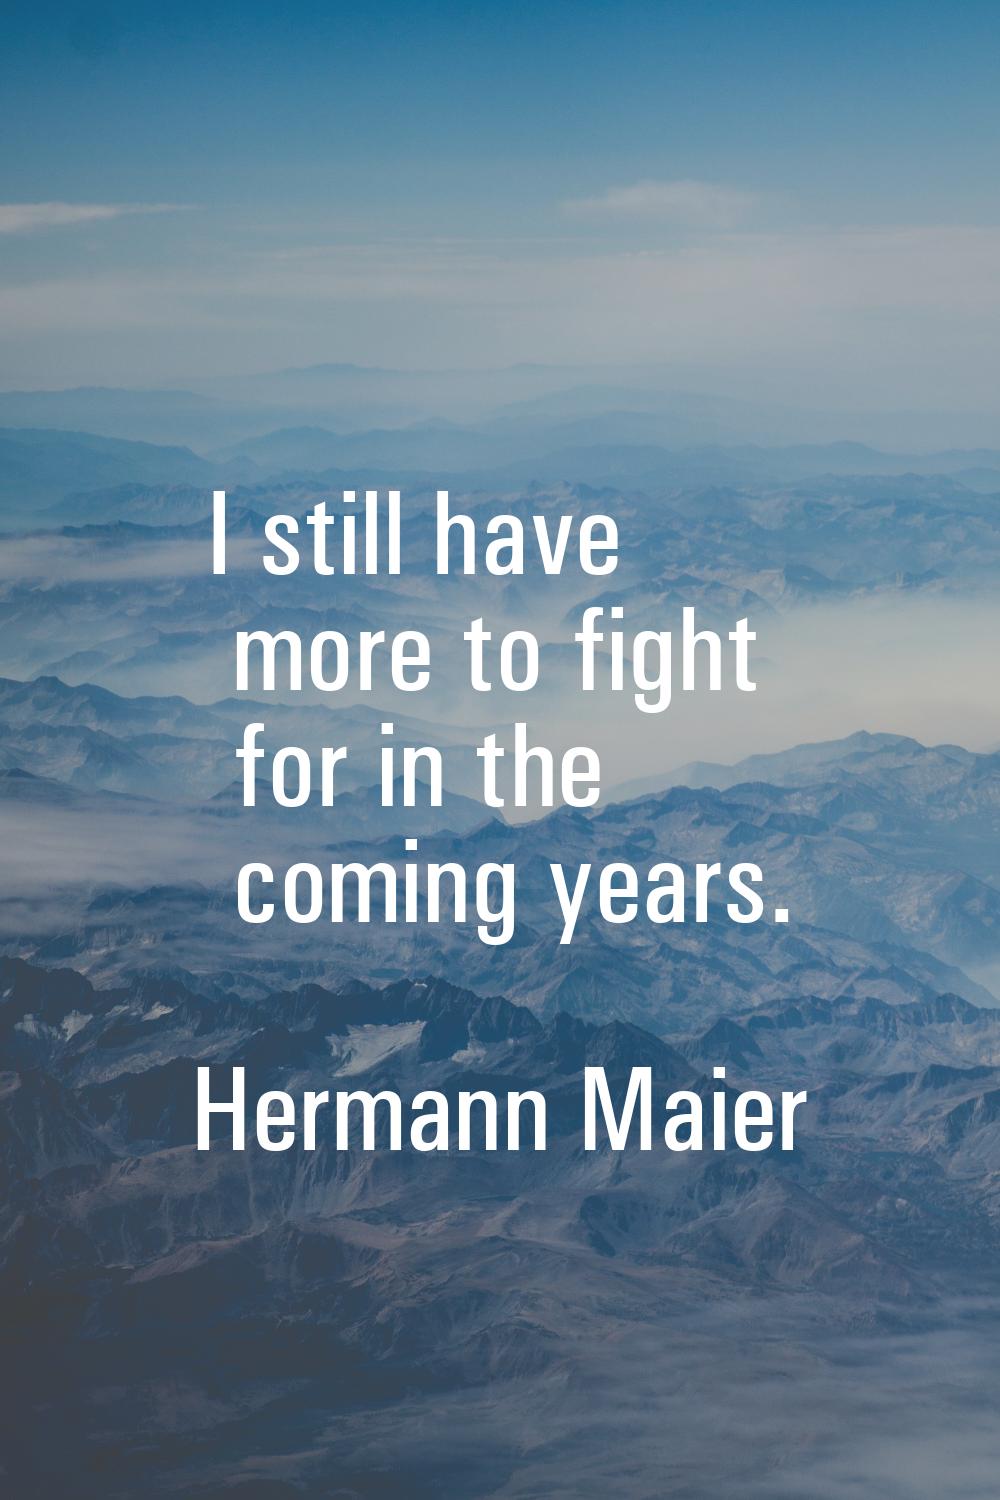 I still have more to fight for in the coming years.